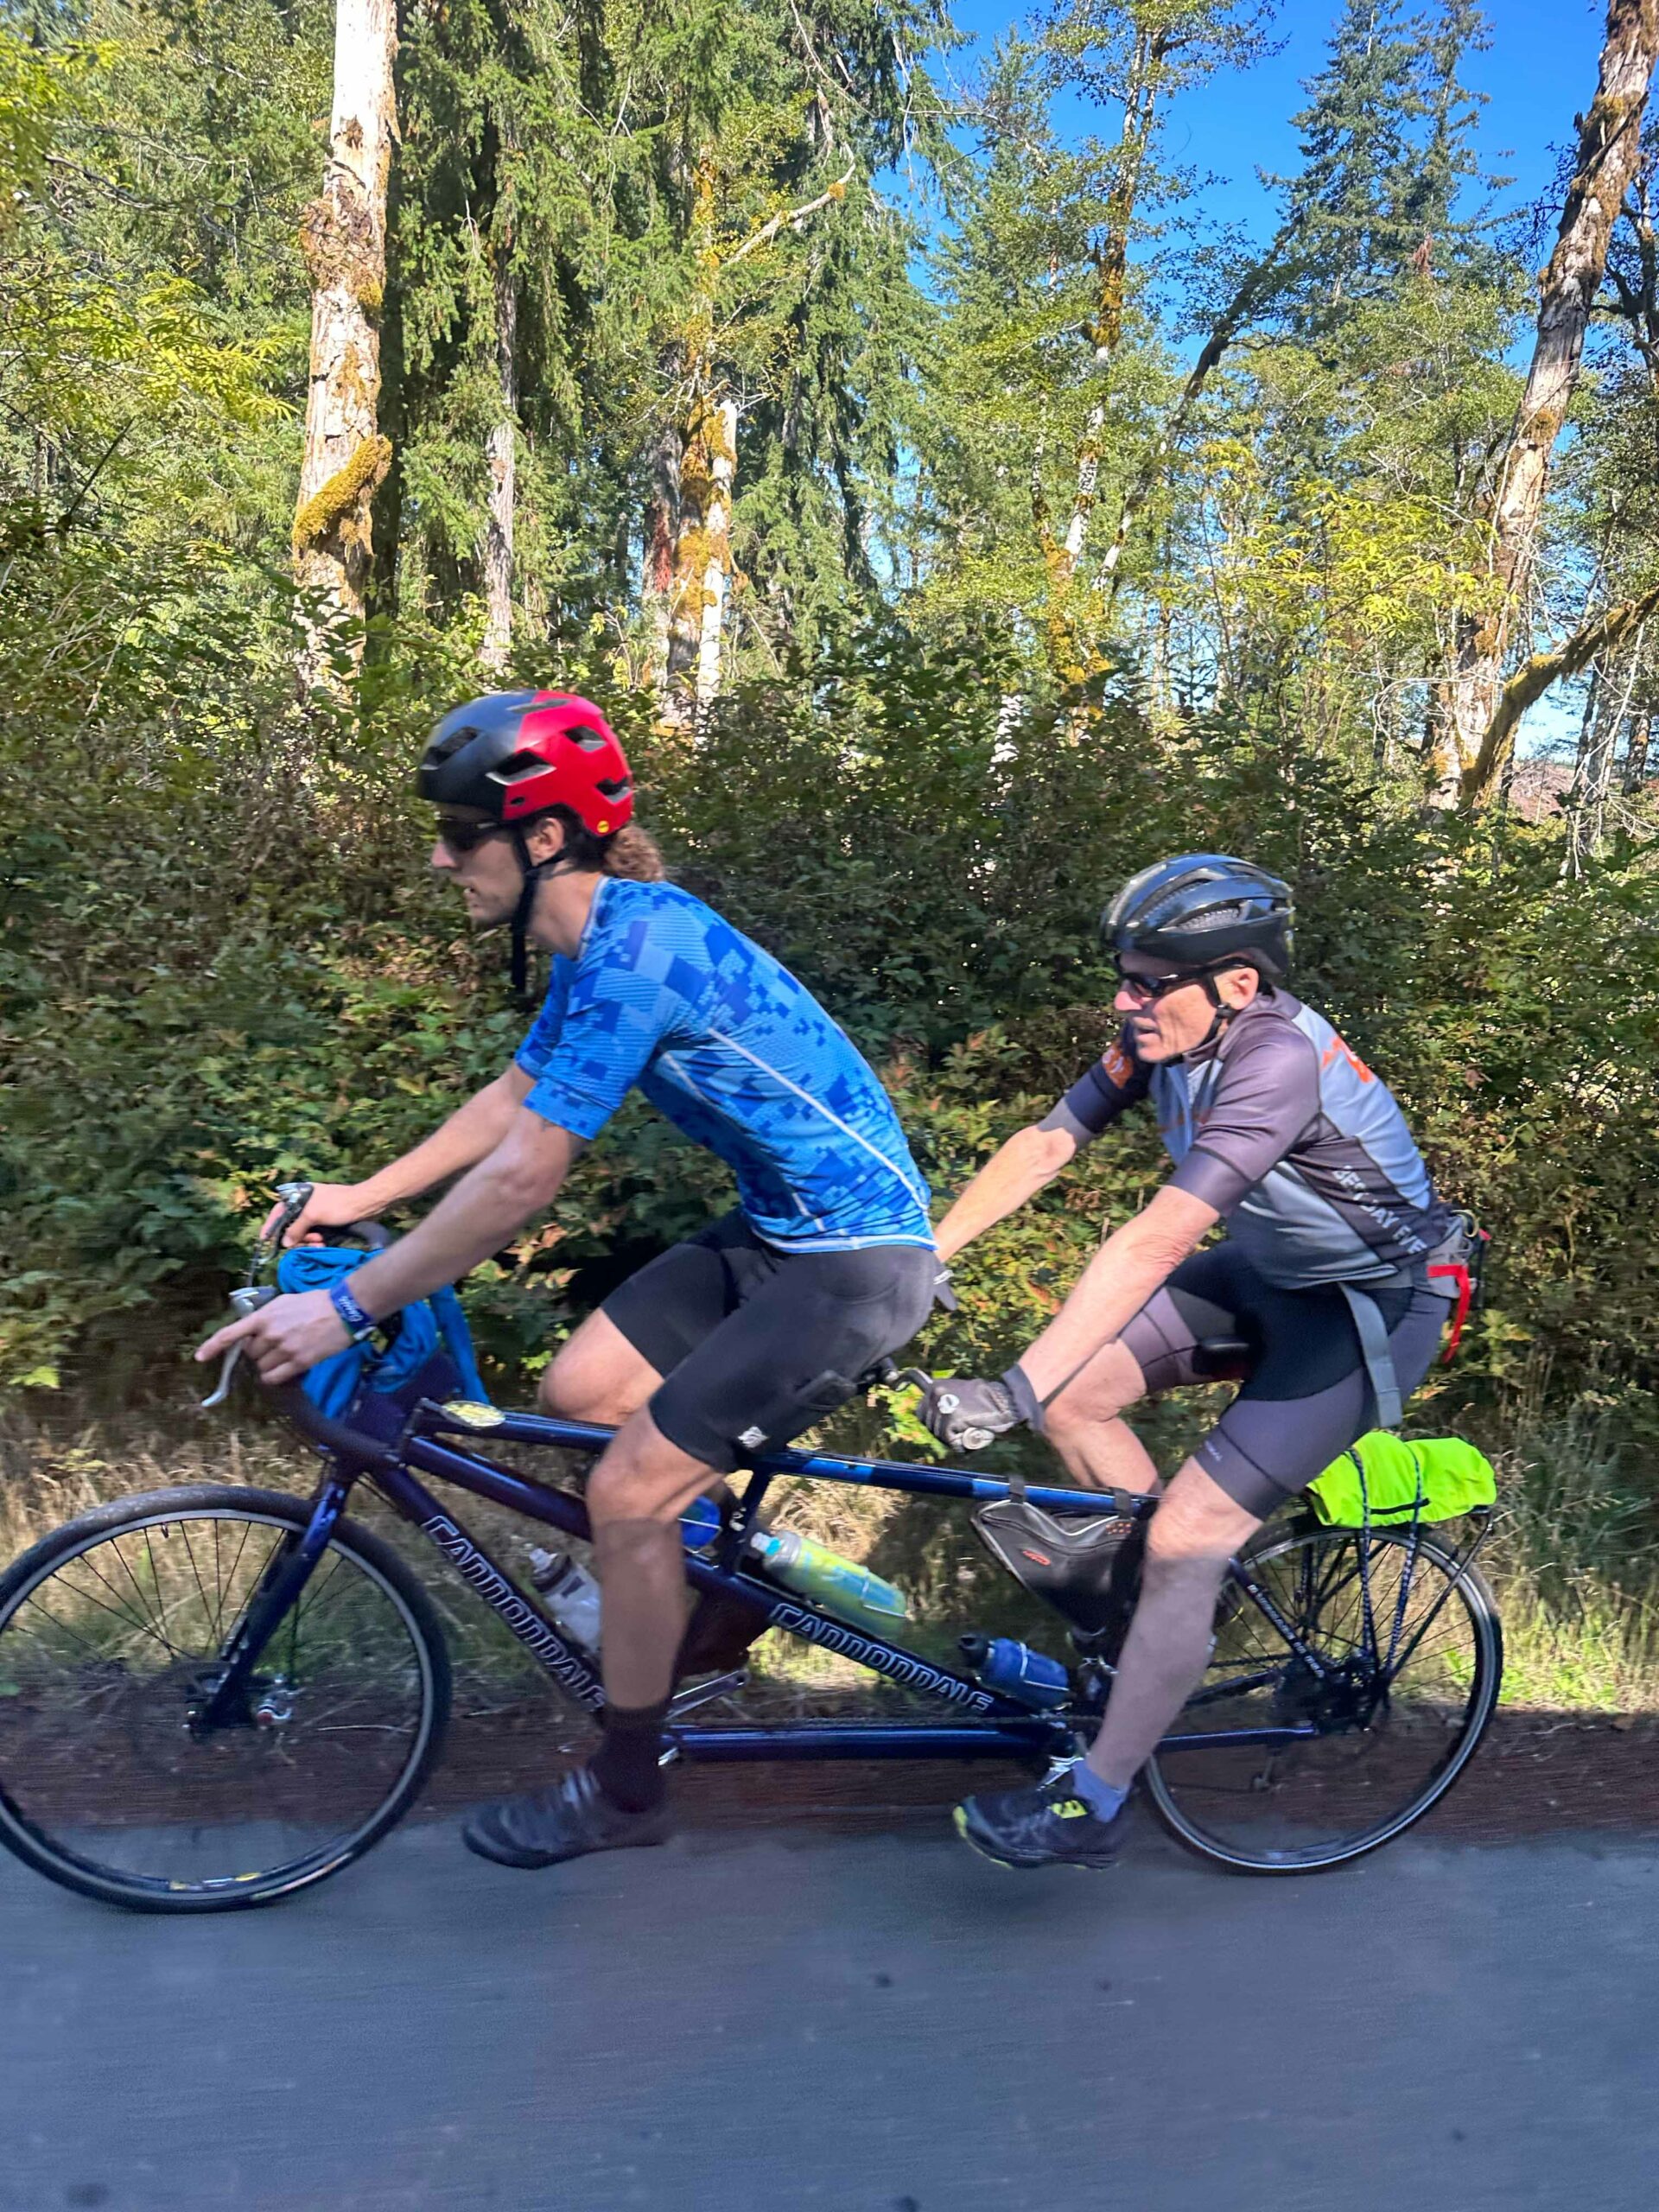 On a tandem bike there is an OAS staff, wearing a red helmet, at the front of the tandem with a blind adaptive athlete in the rear seat wearing a gray helmet.